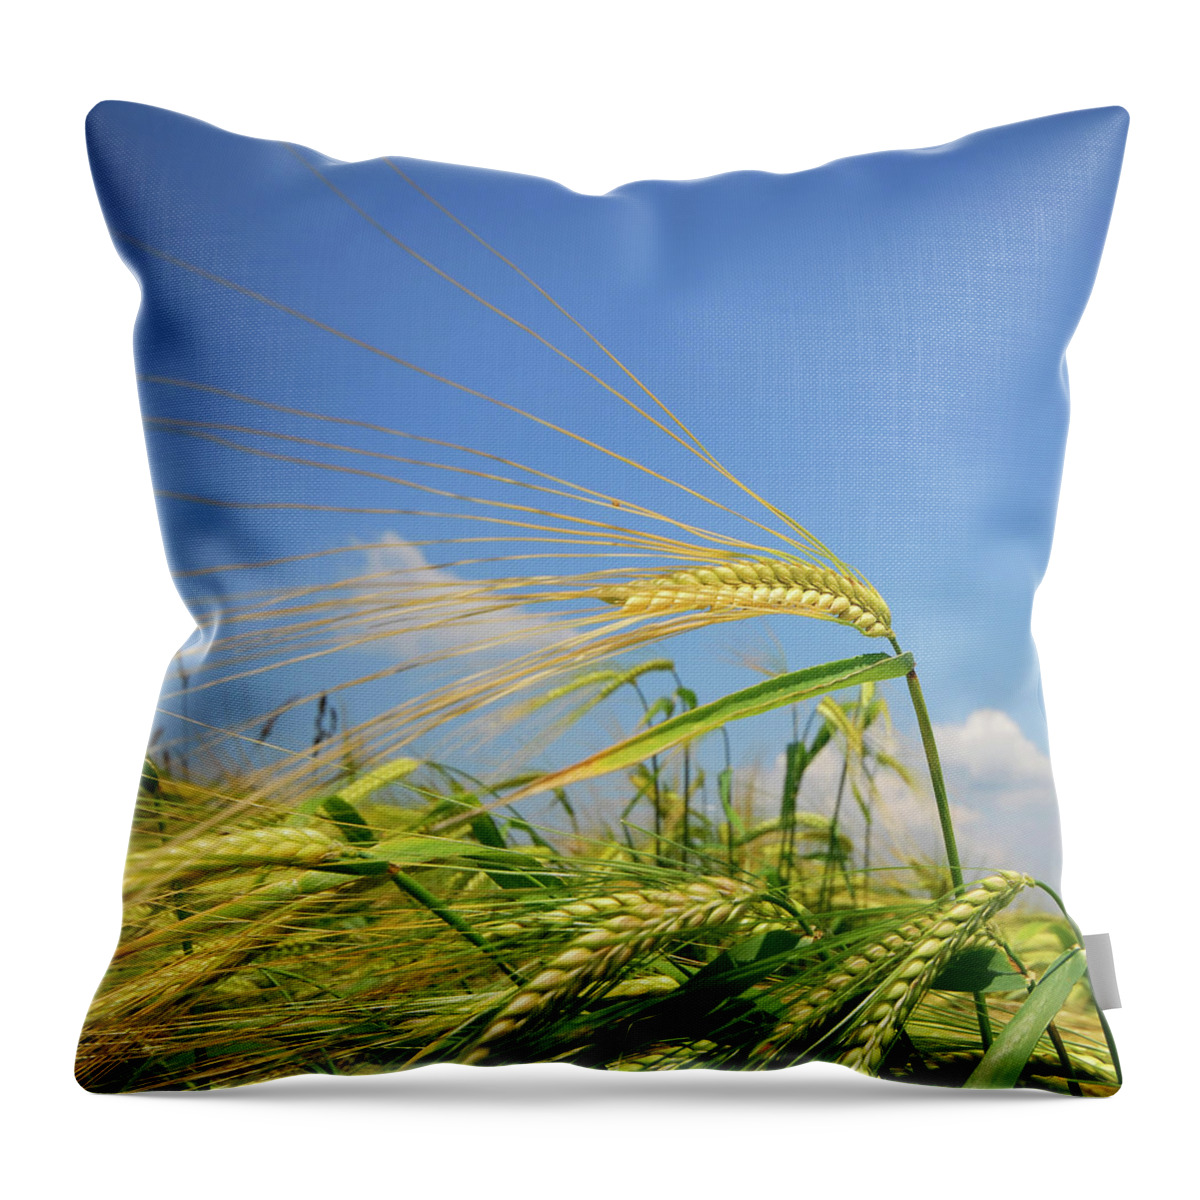 Outdoors Throw Pillow featuring the photograph Wheat Field by Philippe Sainte-laudy Photography